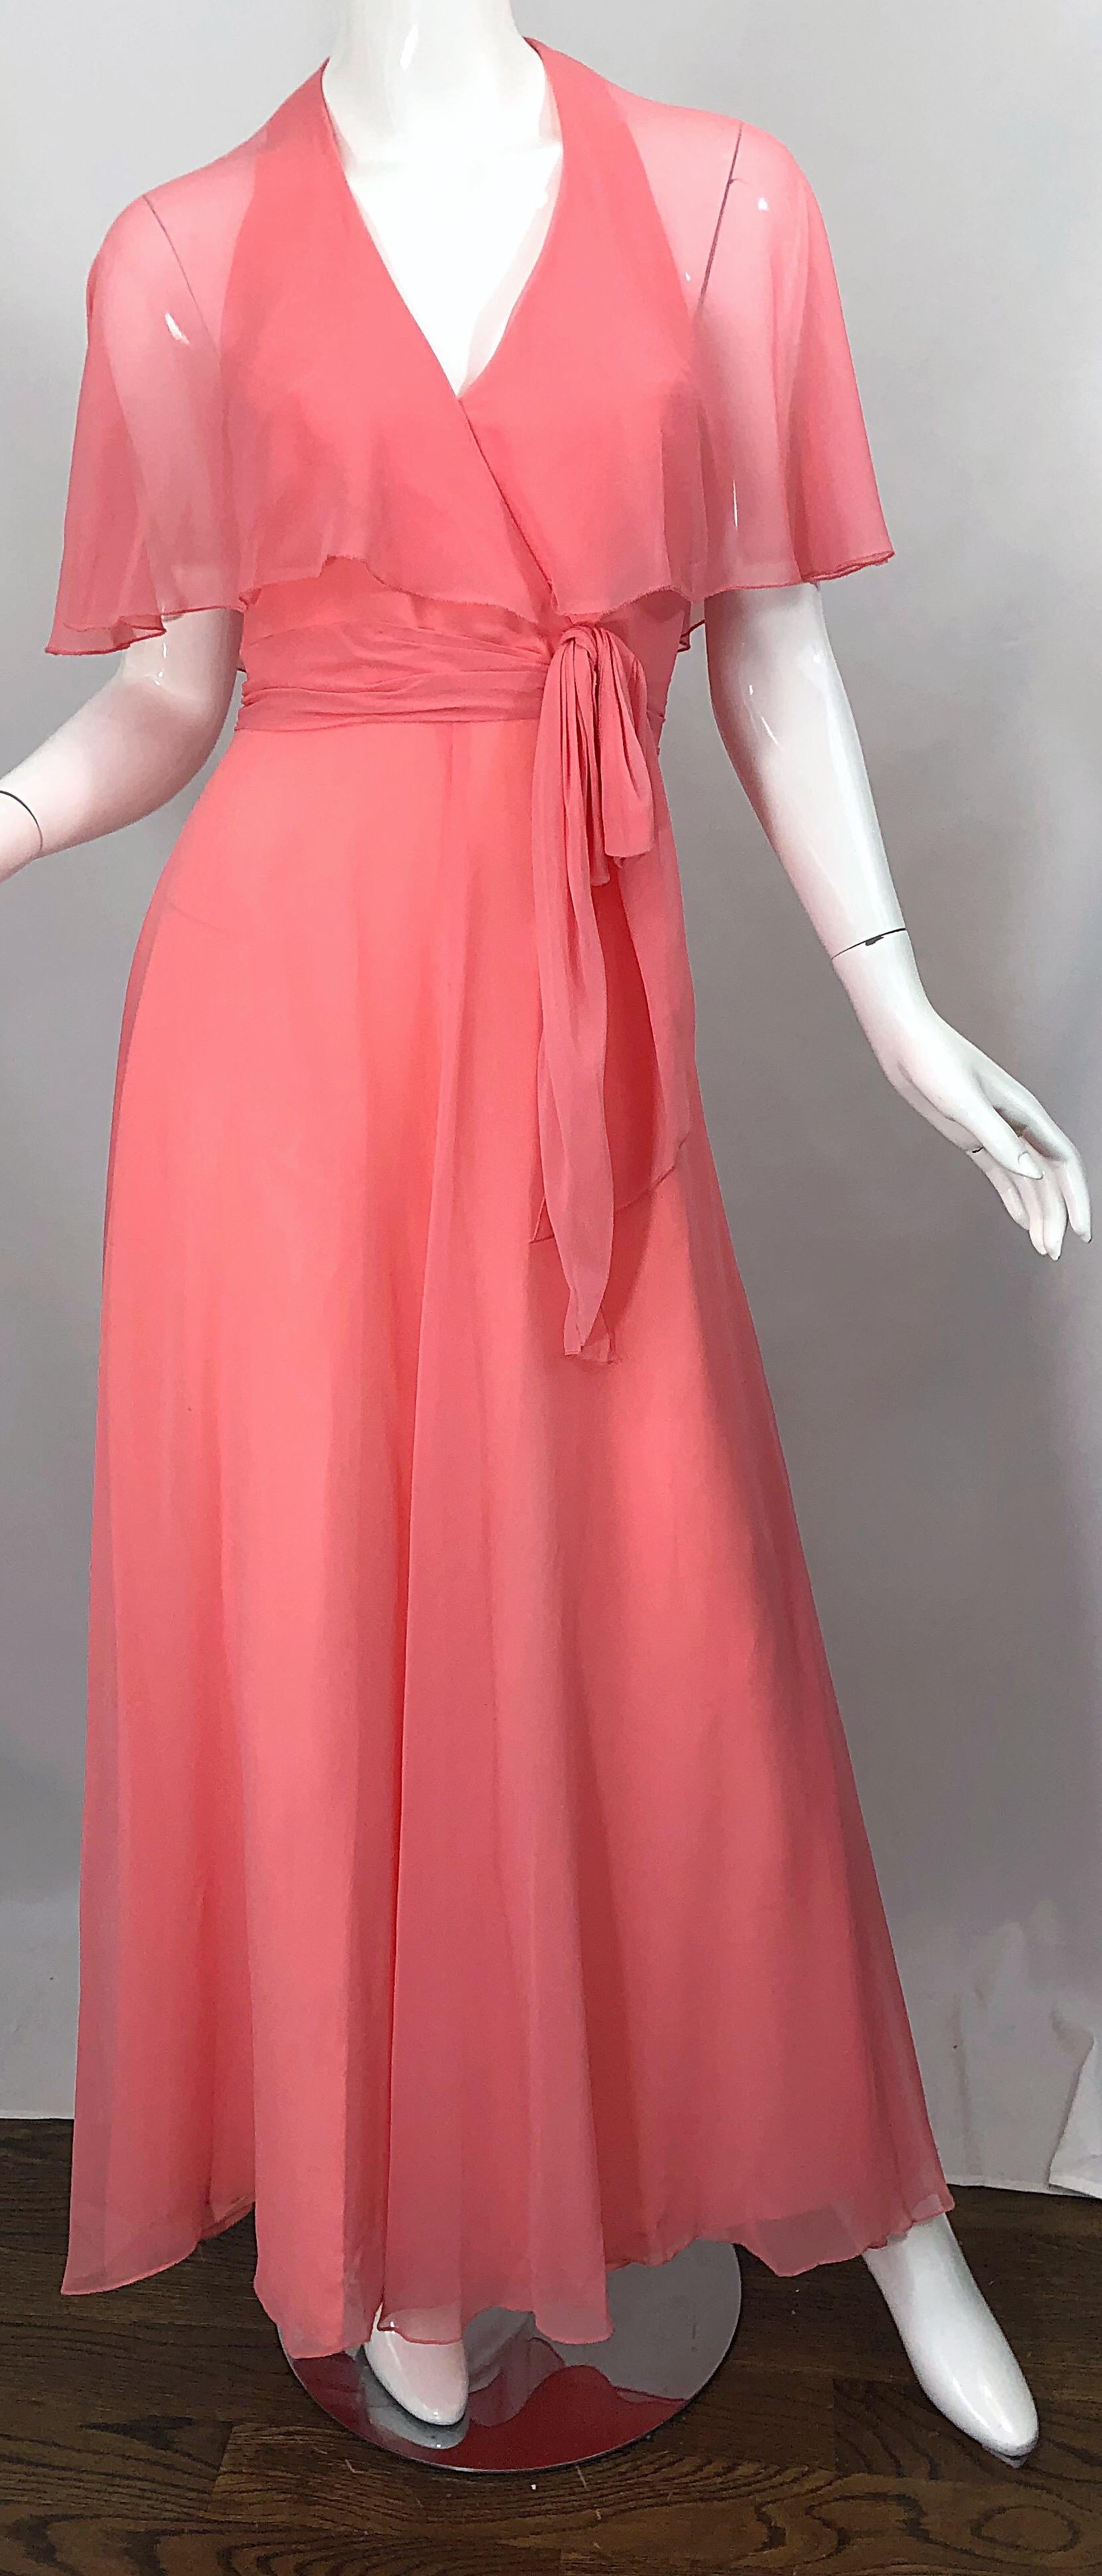 Women's 1970s Coral Pink Silk Chiffon Halter Sheer Caplet Vintage 70s Maxi Dress Gown For Sale